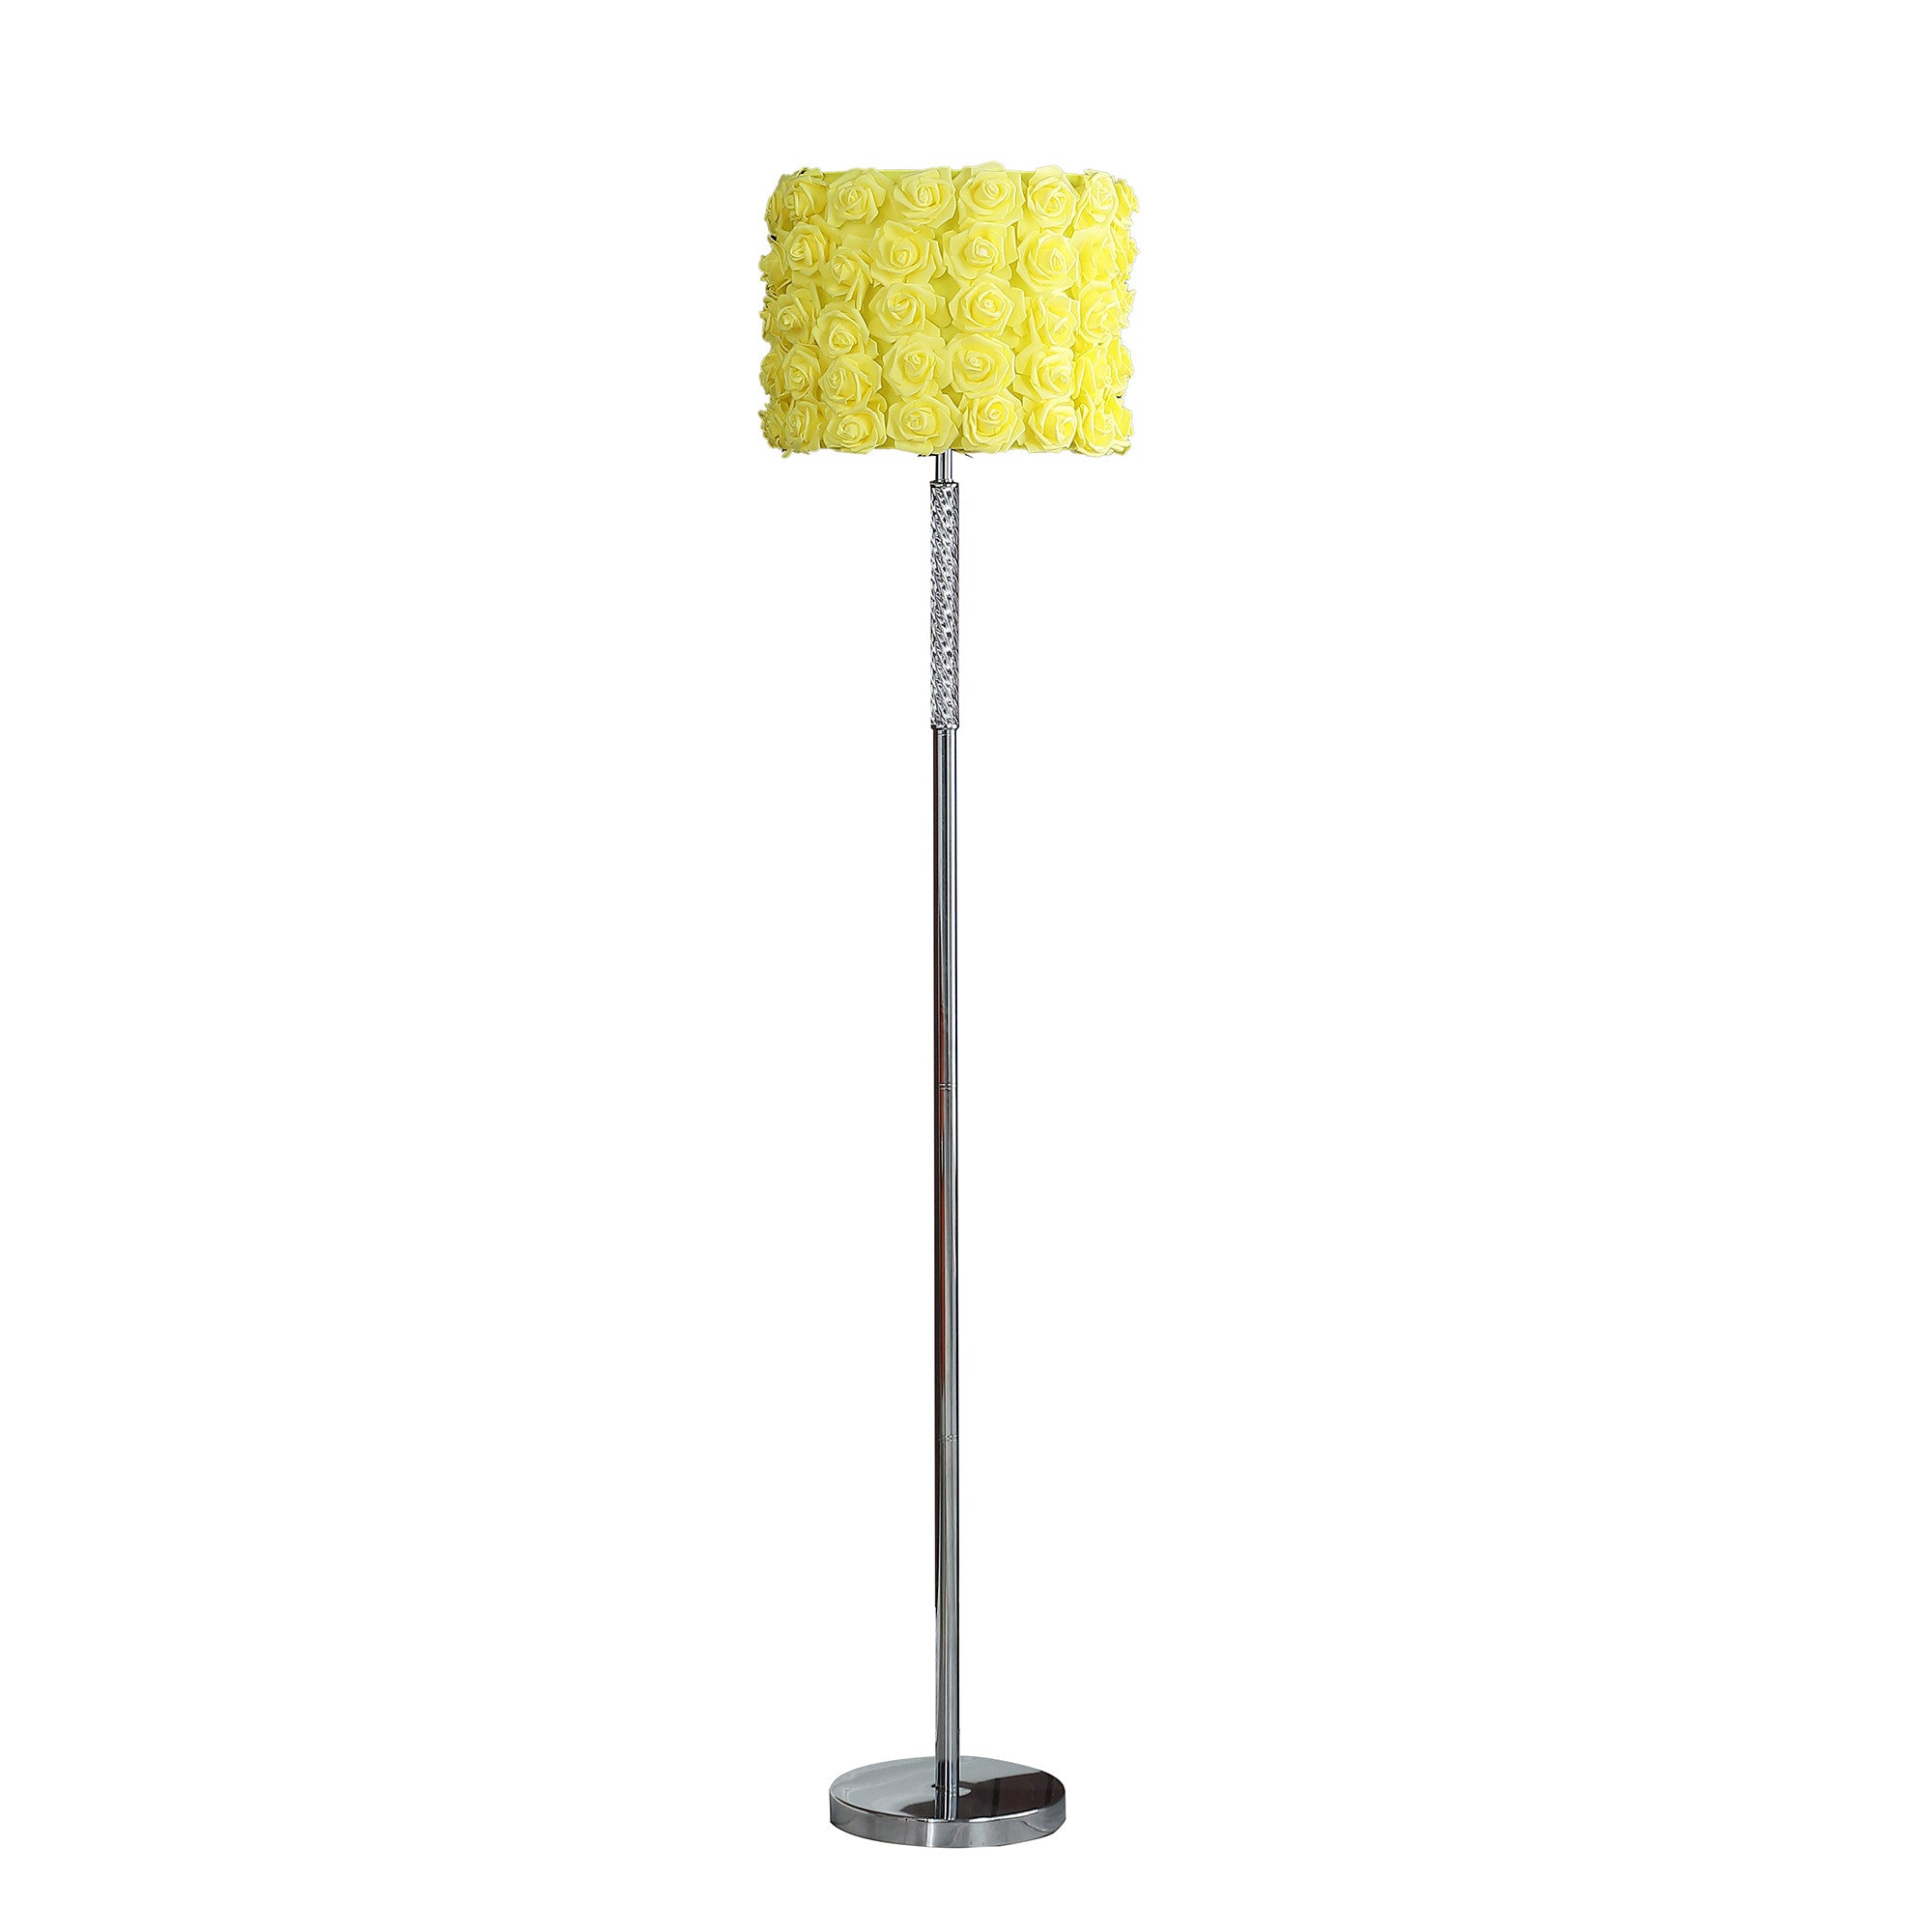 63" Steel and Acrylic Floor Lamp With Yellow Flowers Fabric Drum Shade